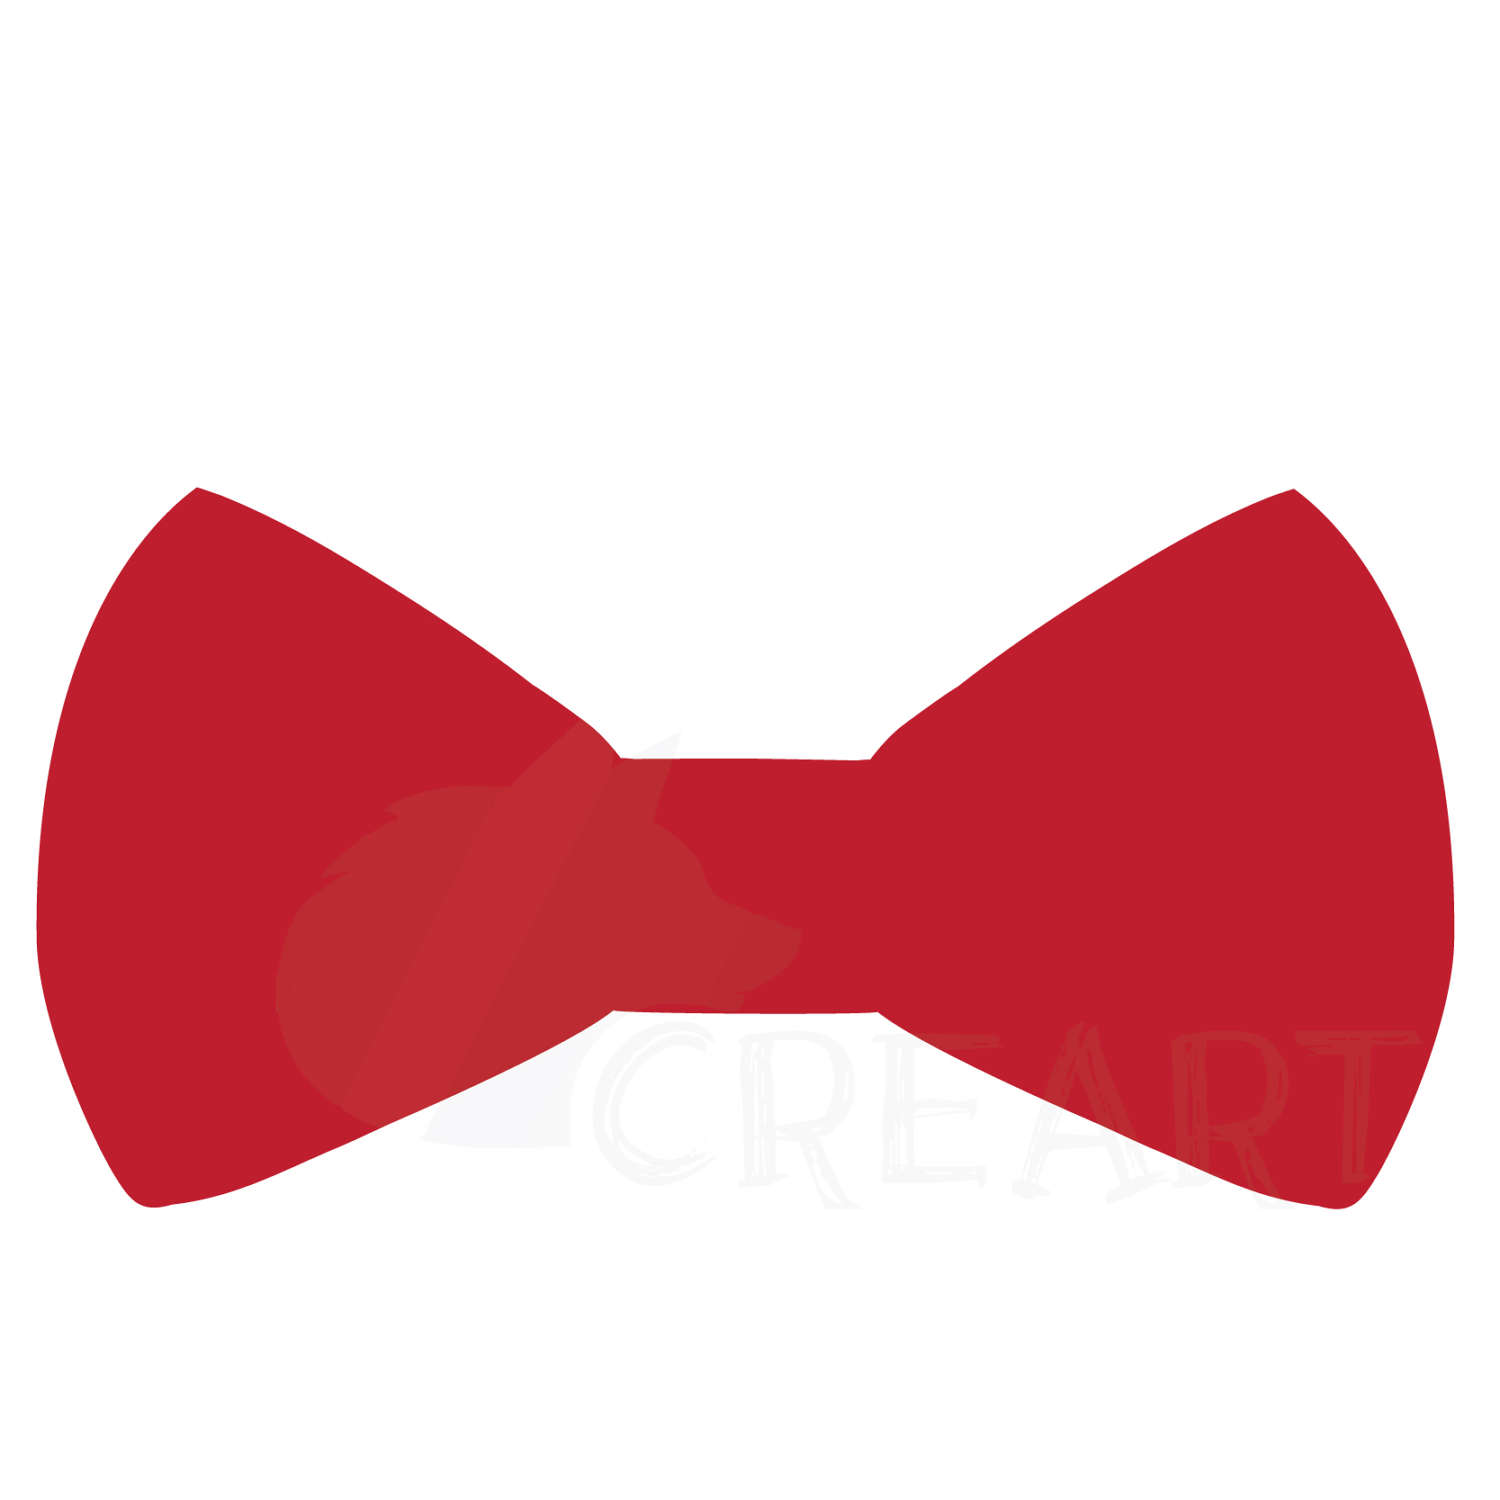 bowtie clipart mickey mouse